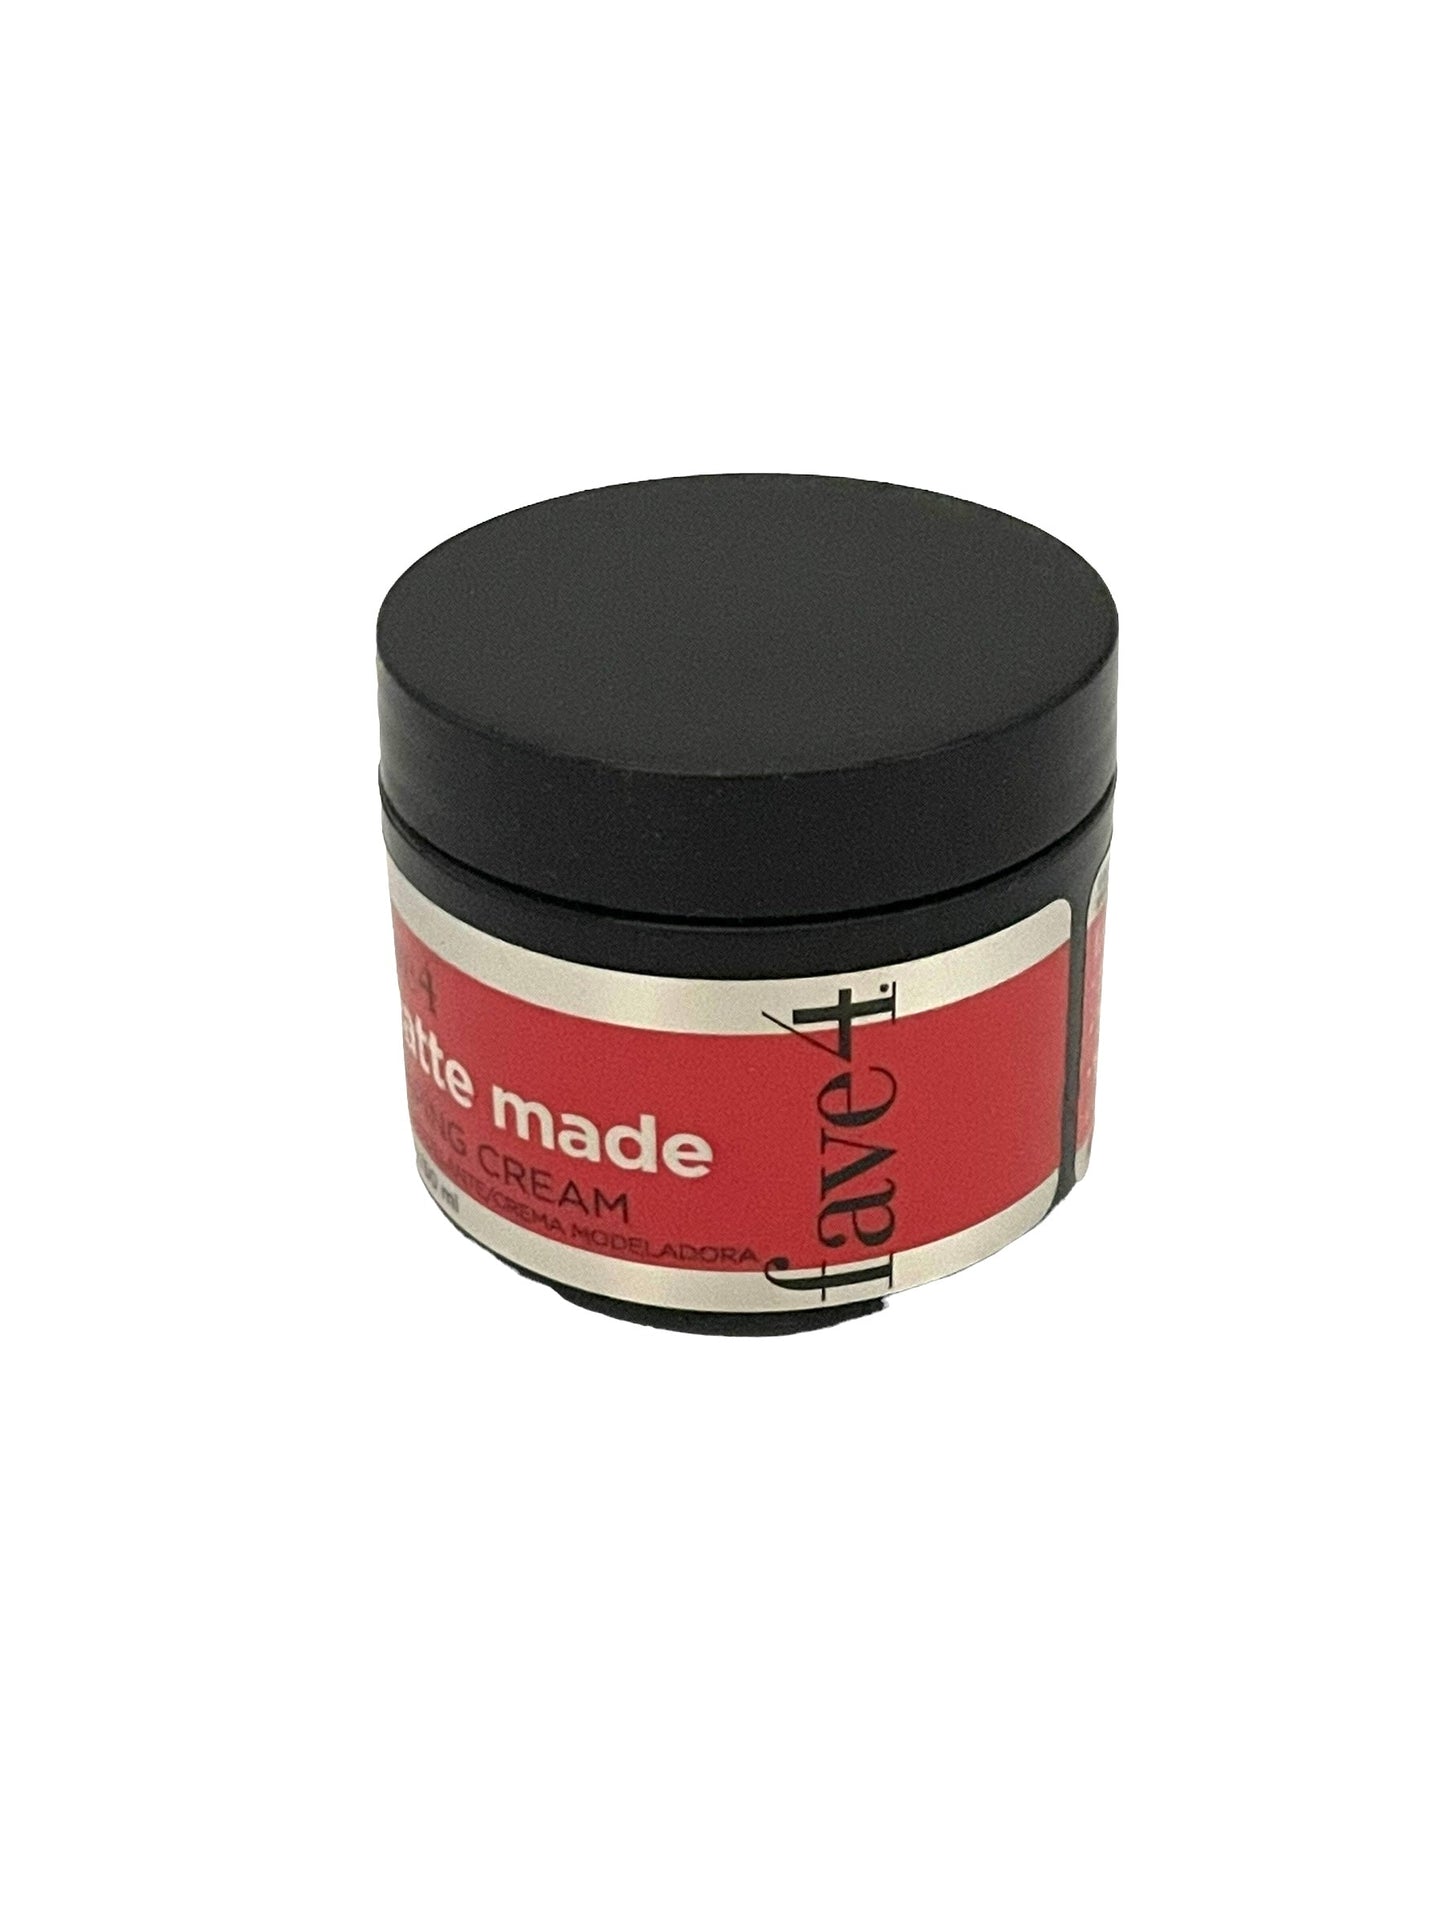 Fave4 Matte Made Hair Shaping Cream 1.7 oz Hair Styling Products